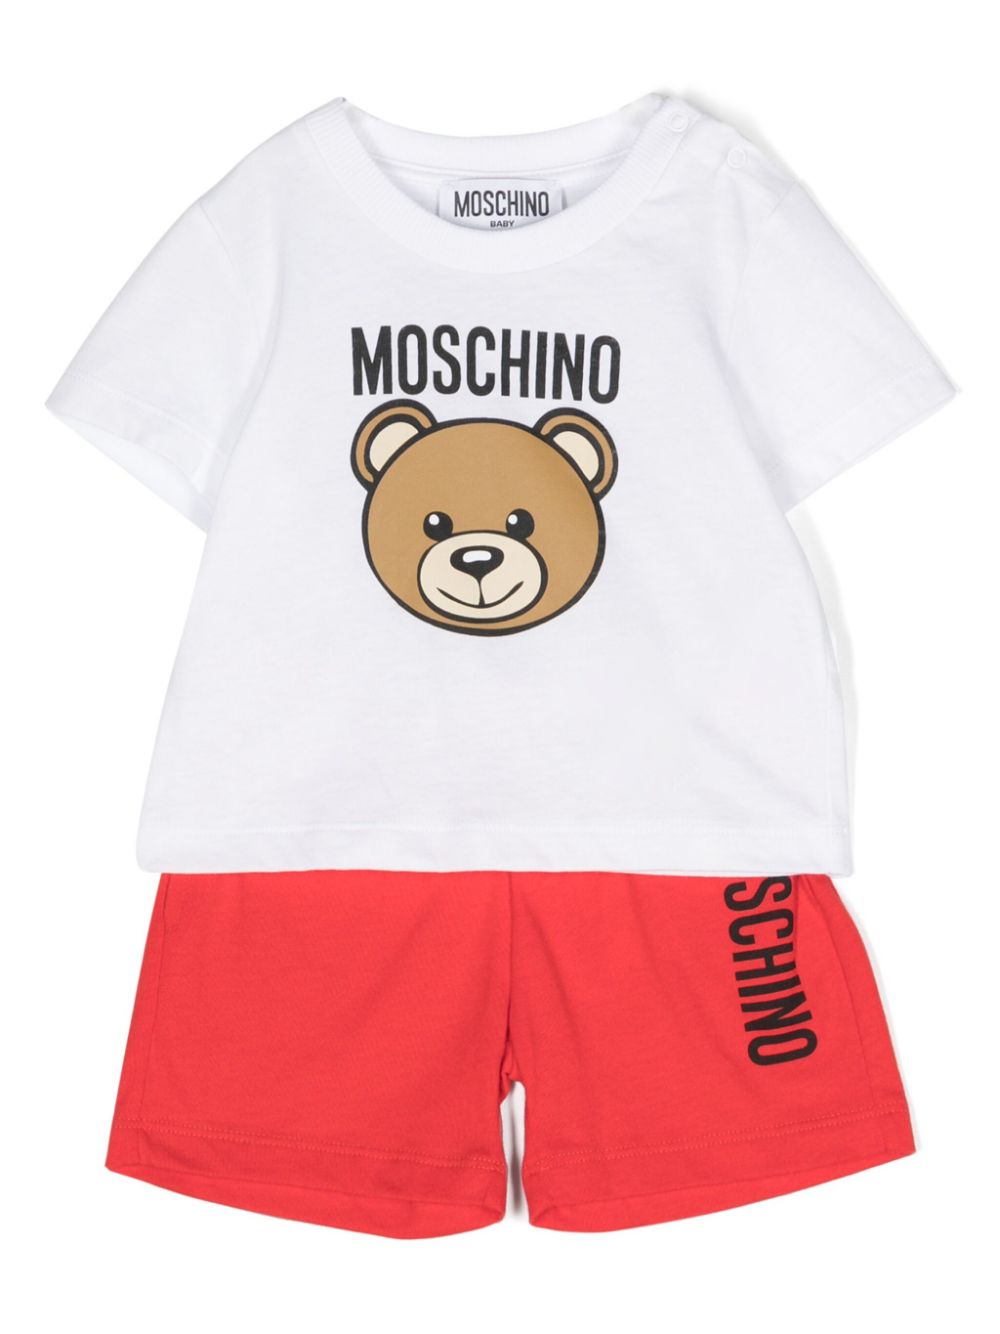 Moschino Kids outfit with print